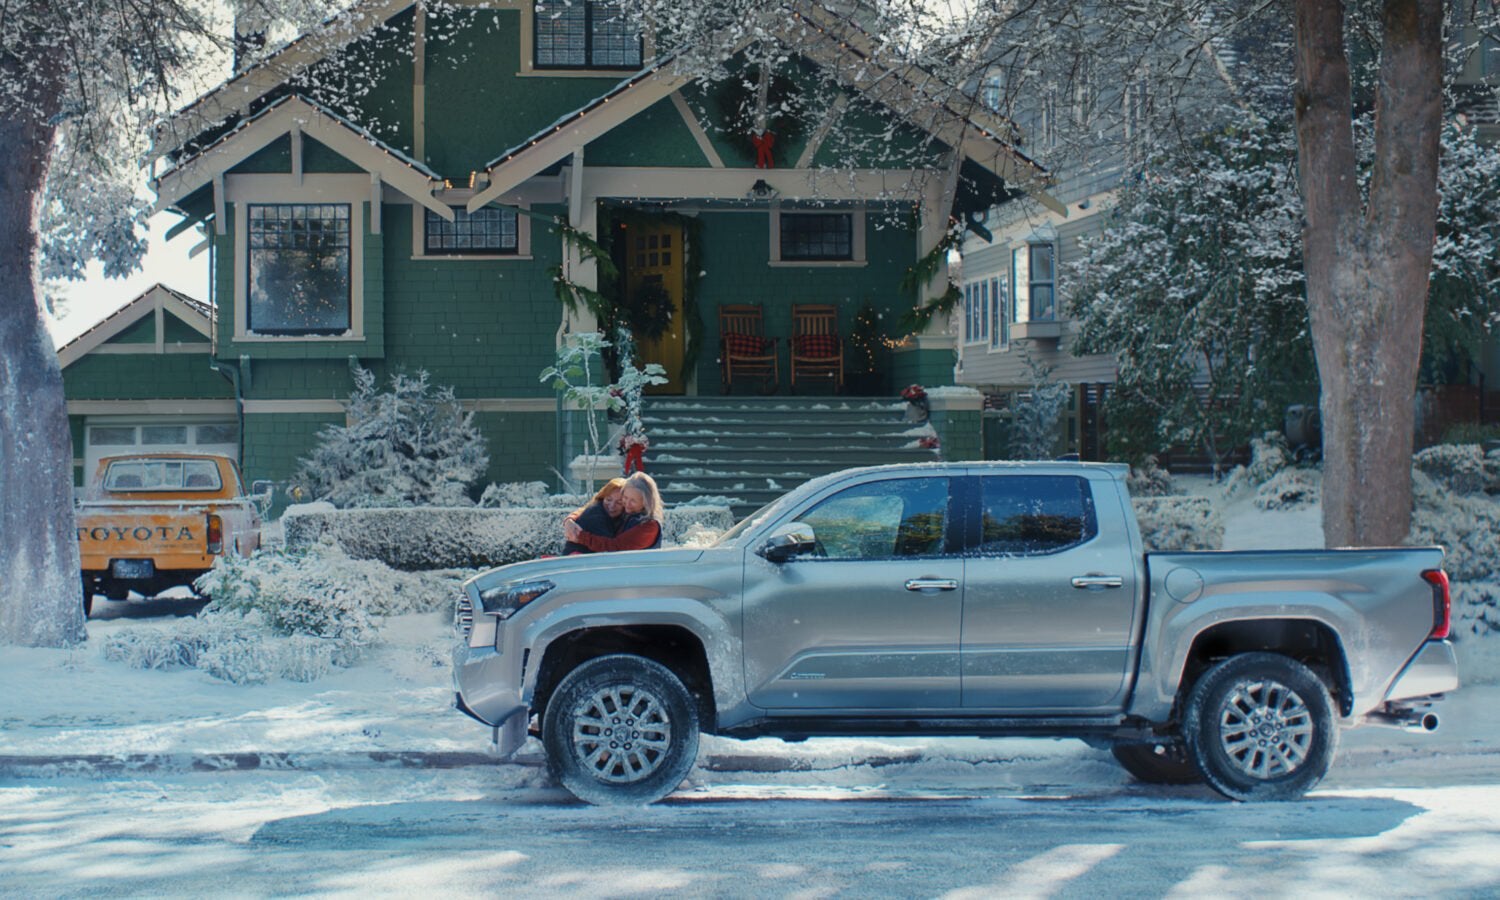 2024 Tacoma Holiday ad featuring 2024 Tacoma - "Present From the Past" Celestial Silver 2024 Tacoma Limited